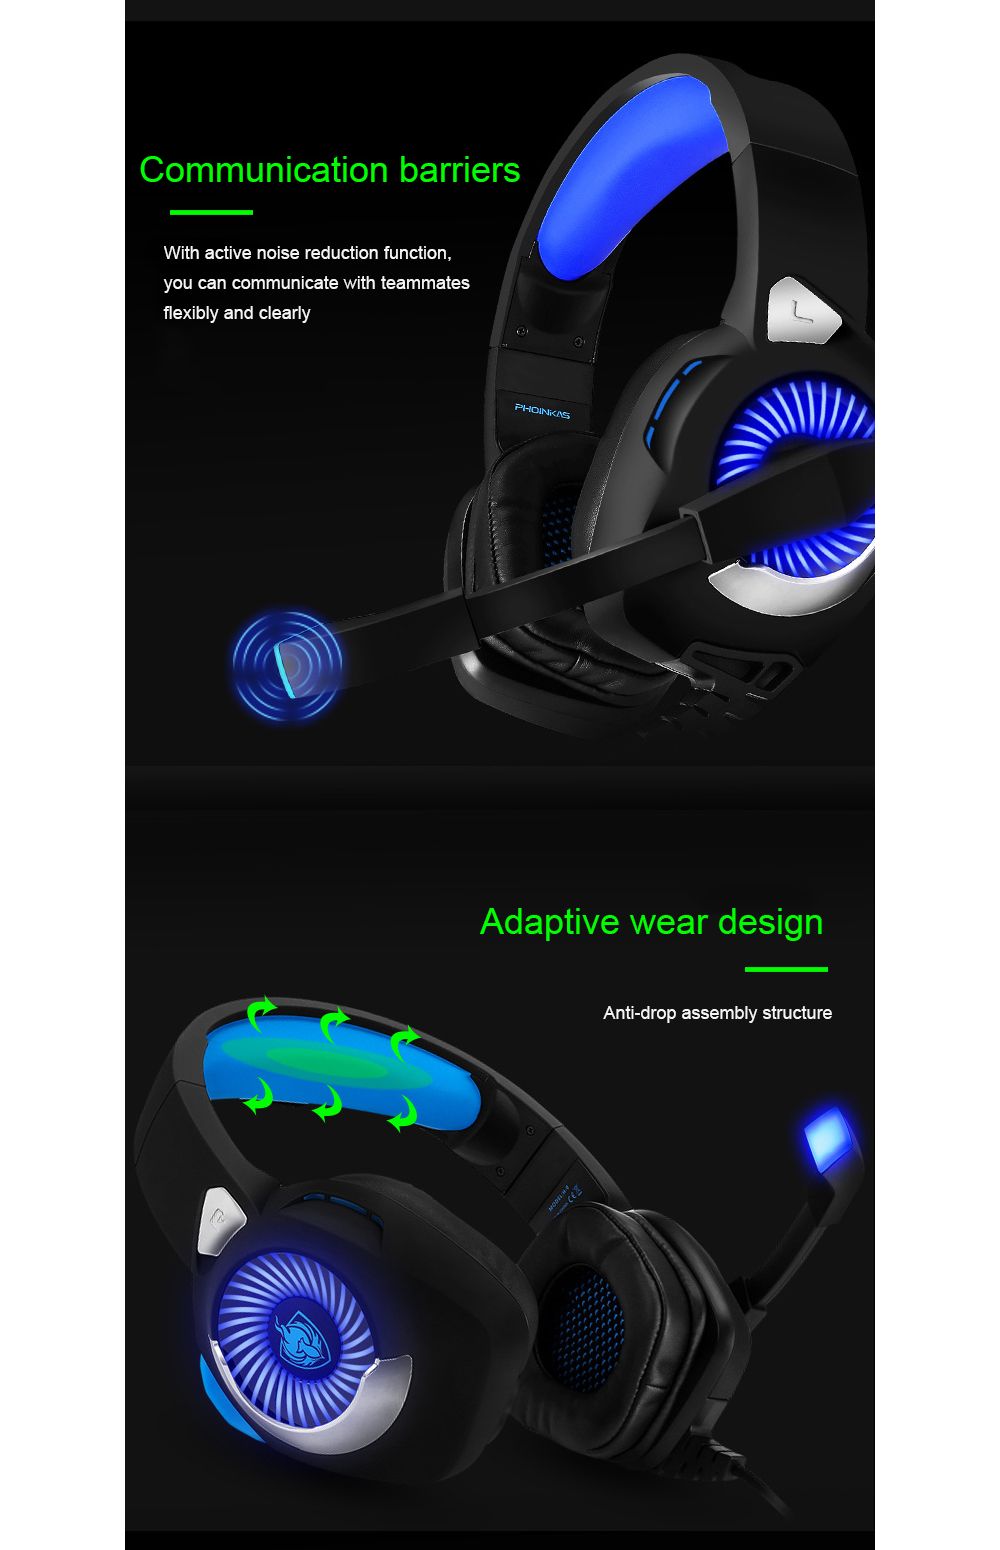 PHOINIKAS-H-9-Gaming-Headset-50mm-Drive-Unit-120deg-Rotating-Microphone-Noise-Reduction-Protein-Leat-1755235